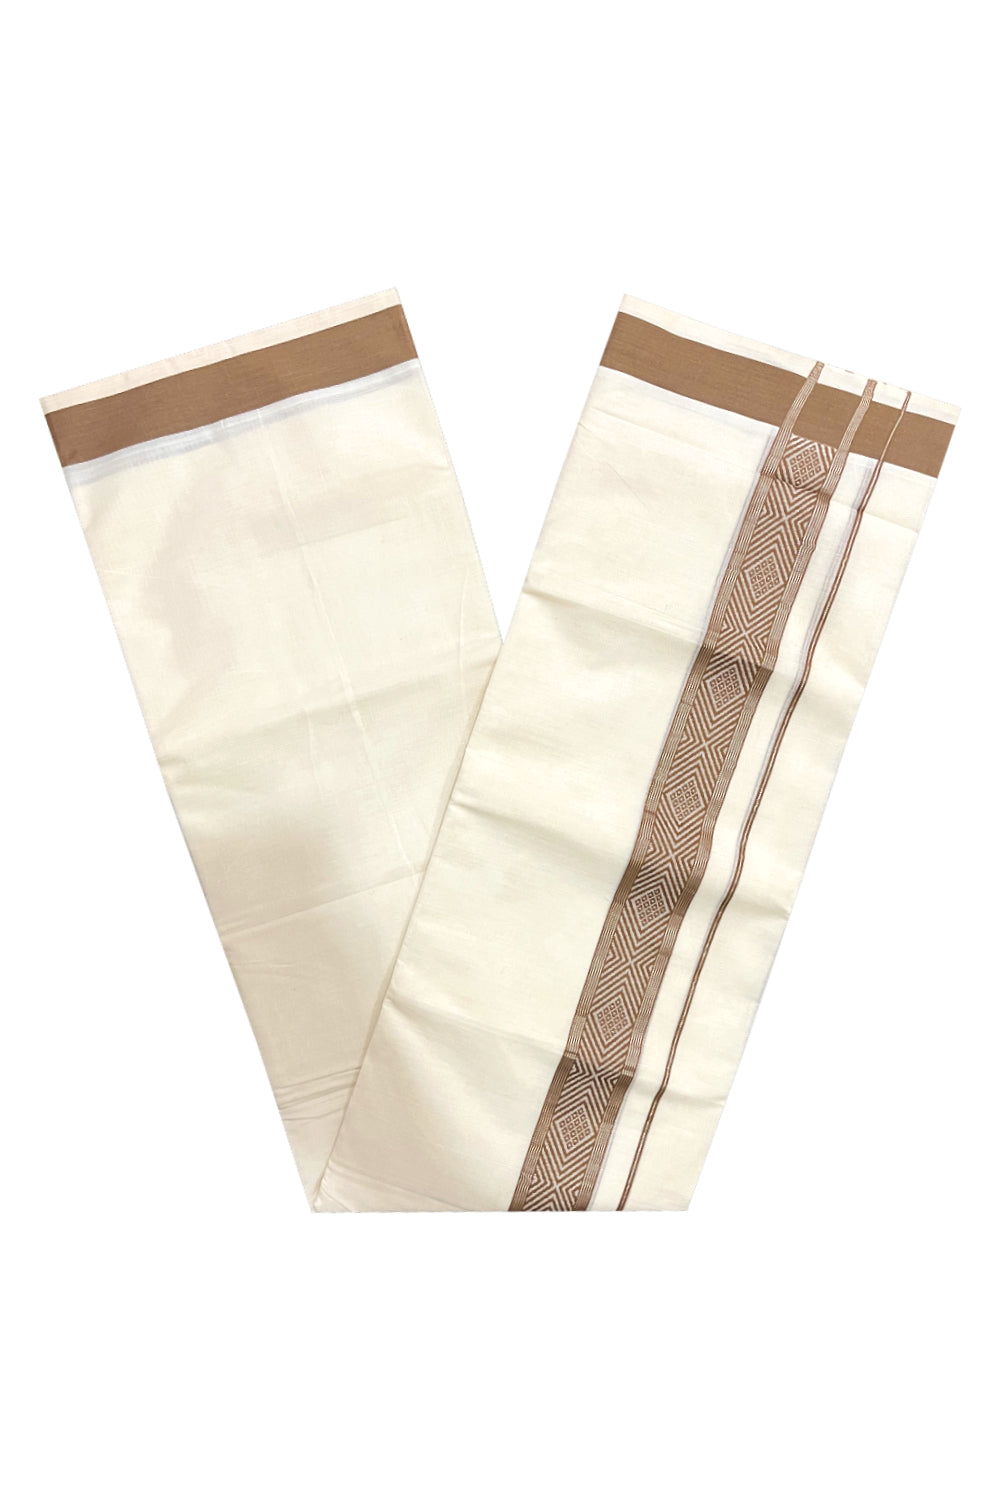 Pure Cotton Off White Double Mundu with Silver Kasavu and Brown Woven Border (South Indian Dhoti)